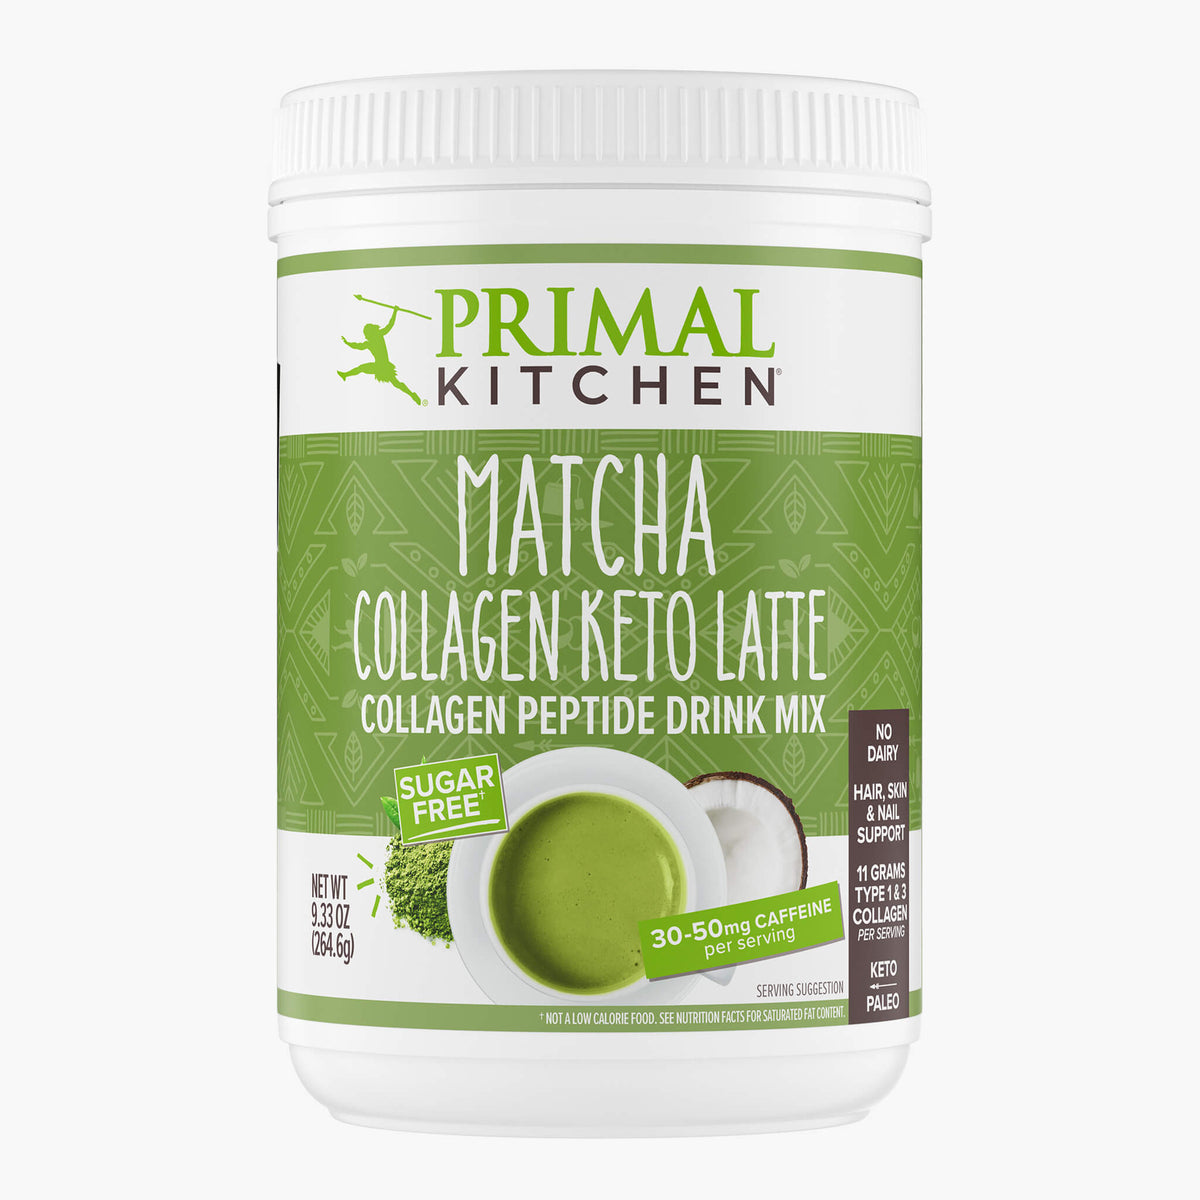 A canister of Primal Kitchen Matcha Collagen Keto Latte collagen peptide drink mix with a green and white label on a light grey background.